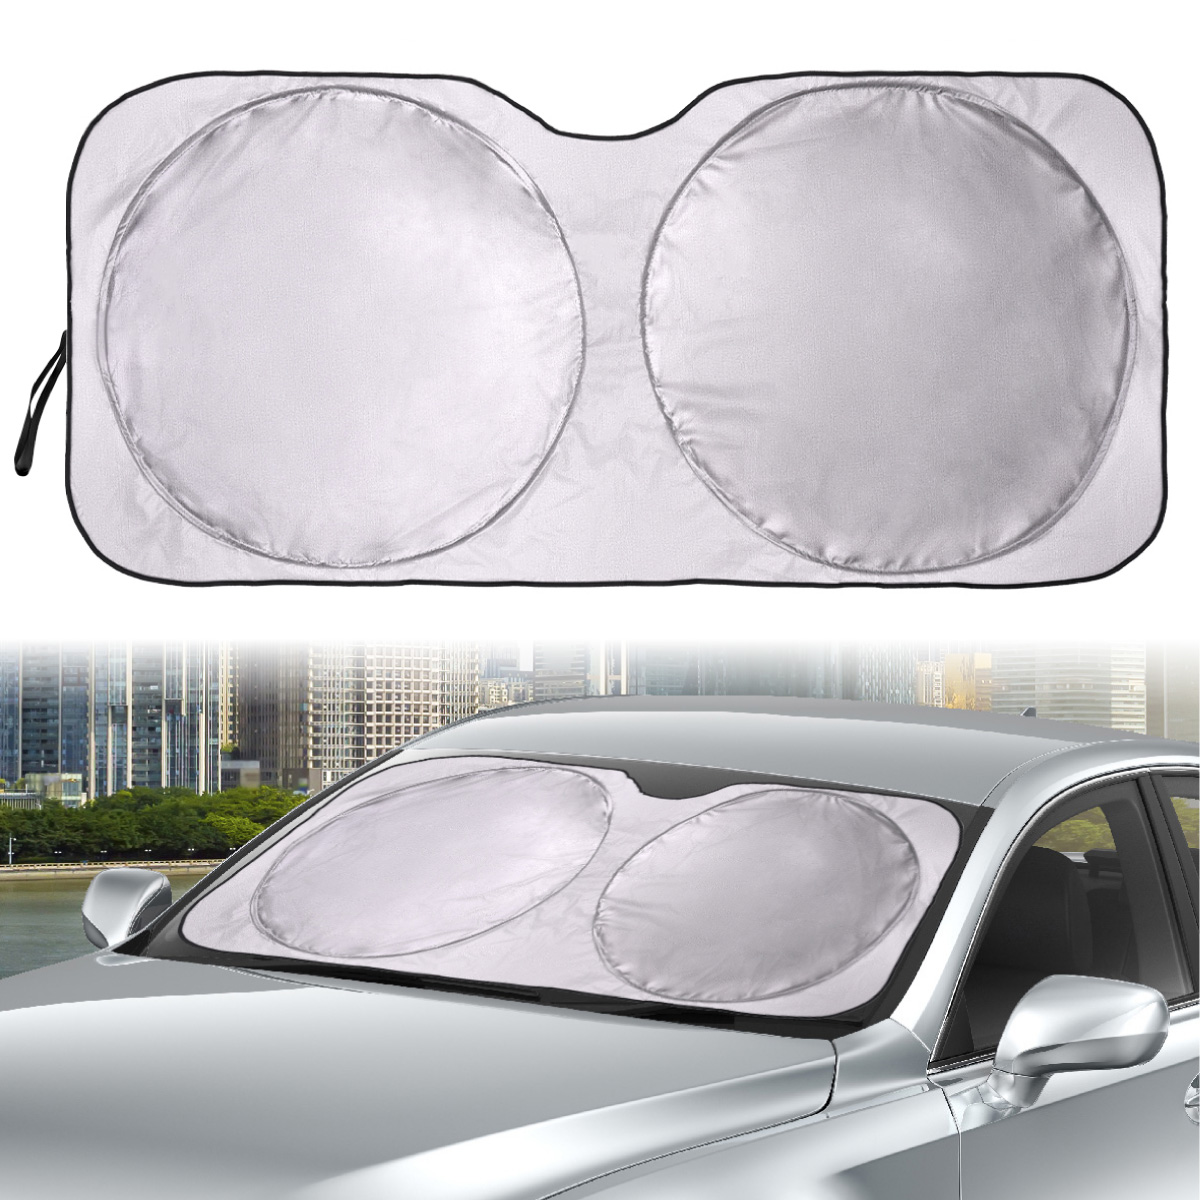 Auto Drive Double Rings Windshield AD22D-83 Twist Sun Shade 1 Pack,  63x29.5 